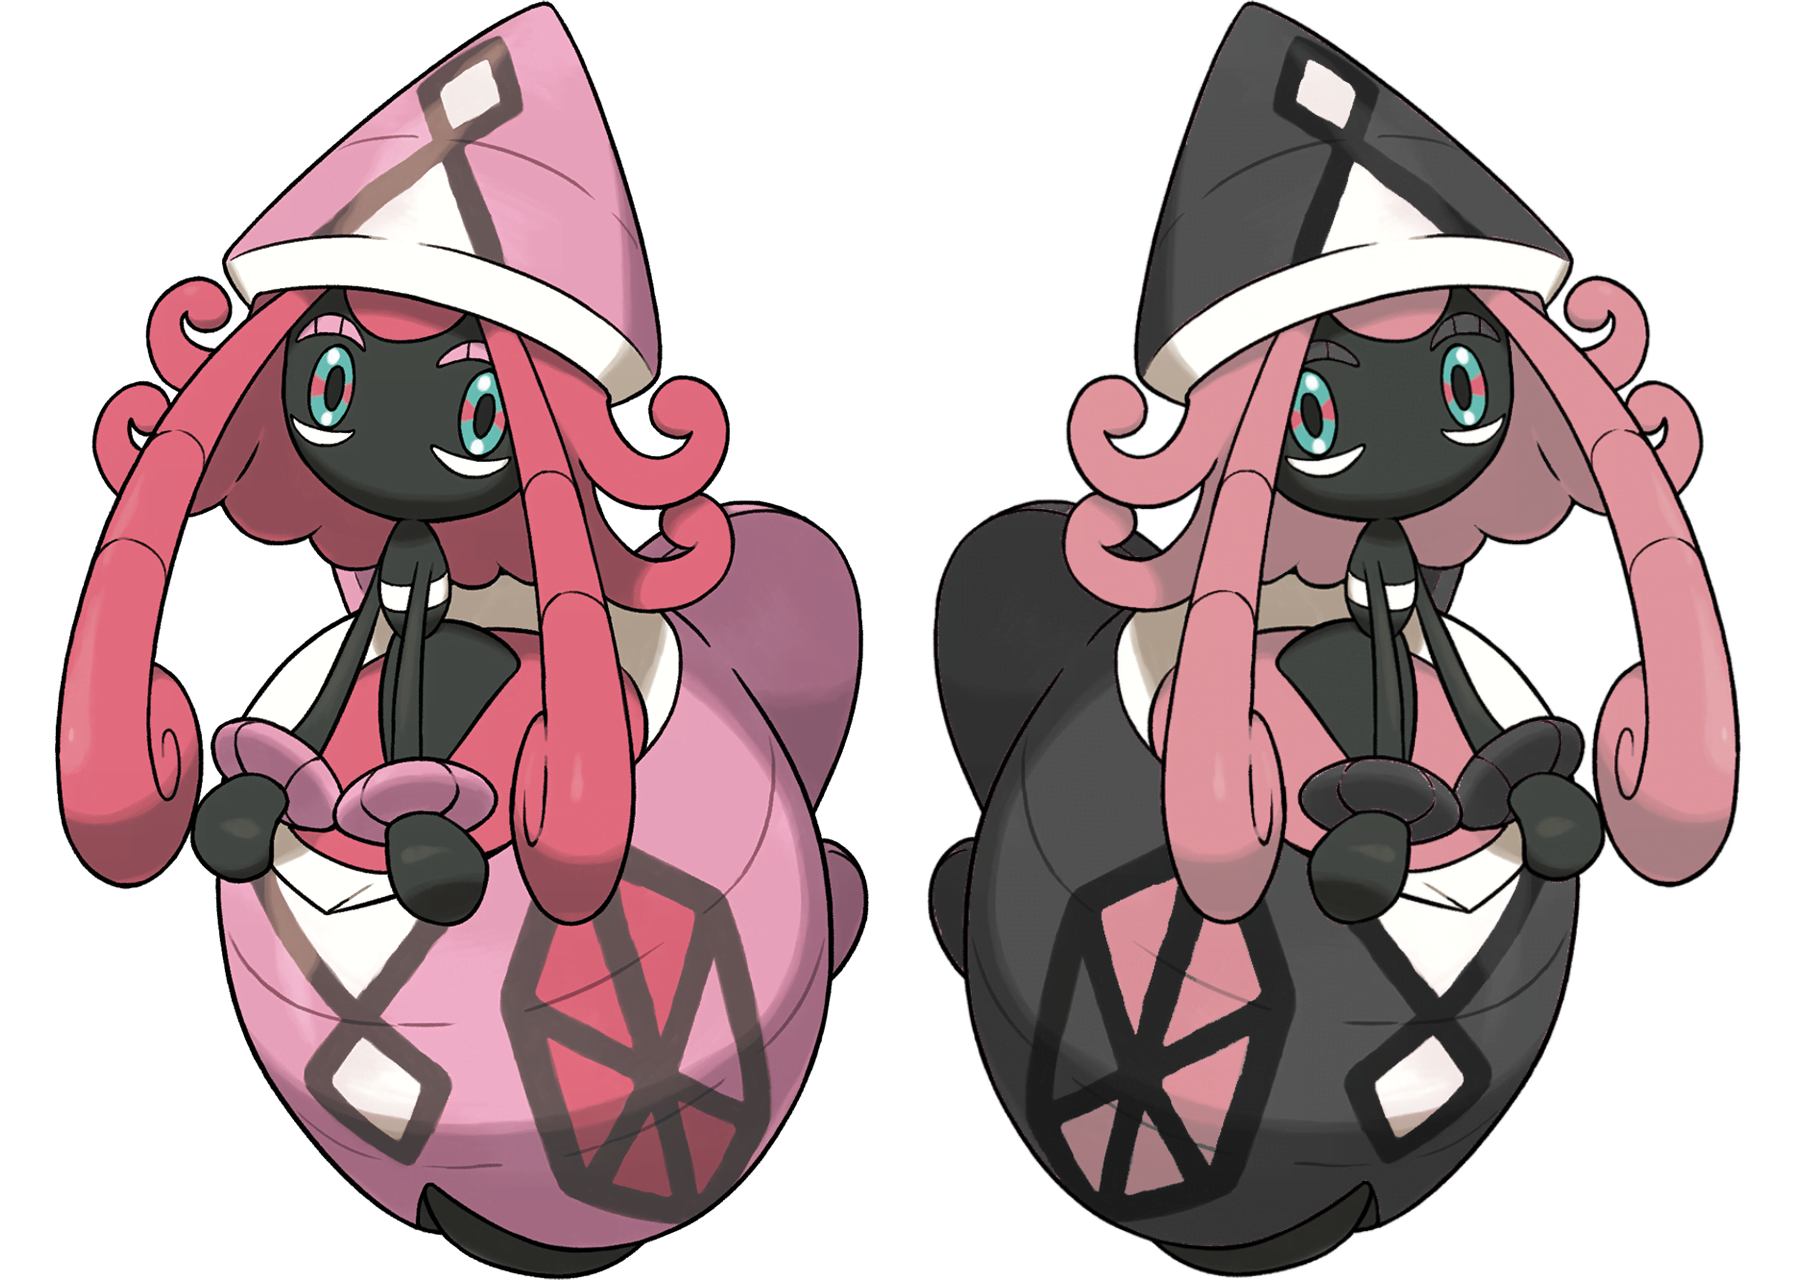 In addition to the black shell, Shiny Tapu Lele’s "hair" is a dif...